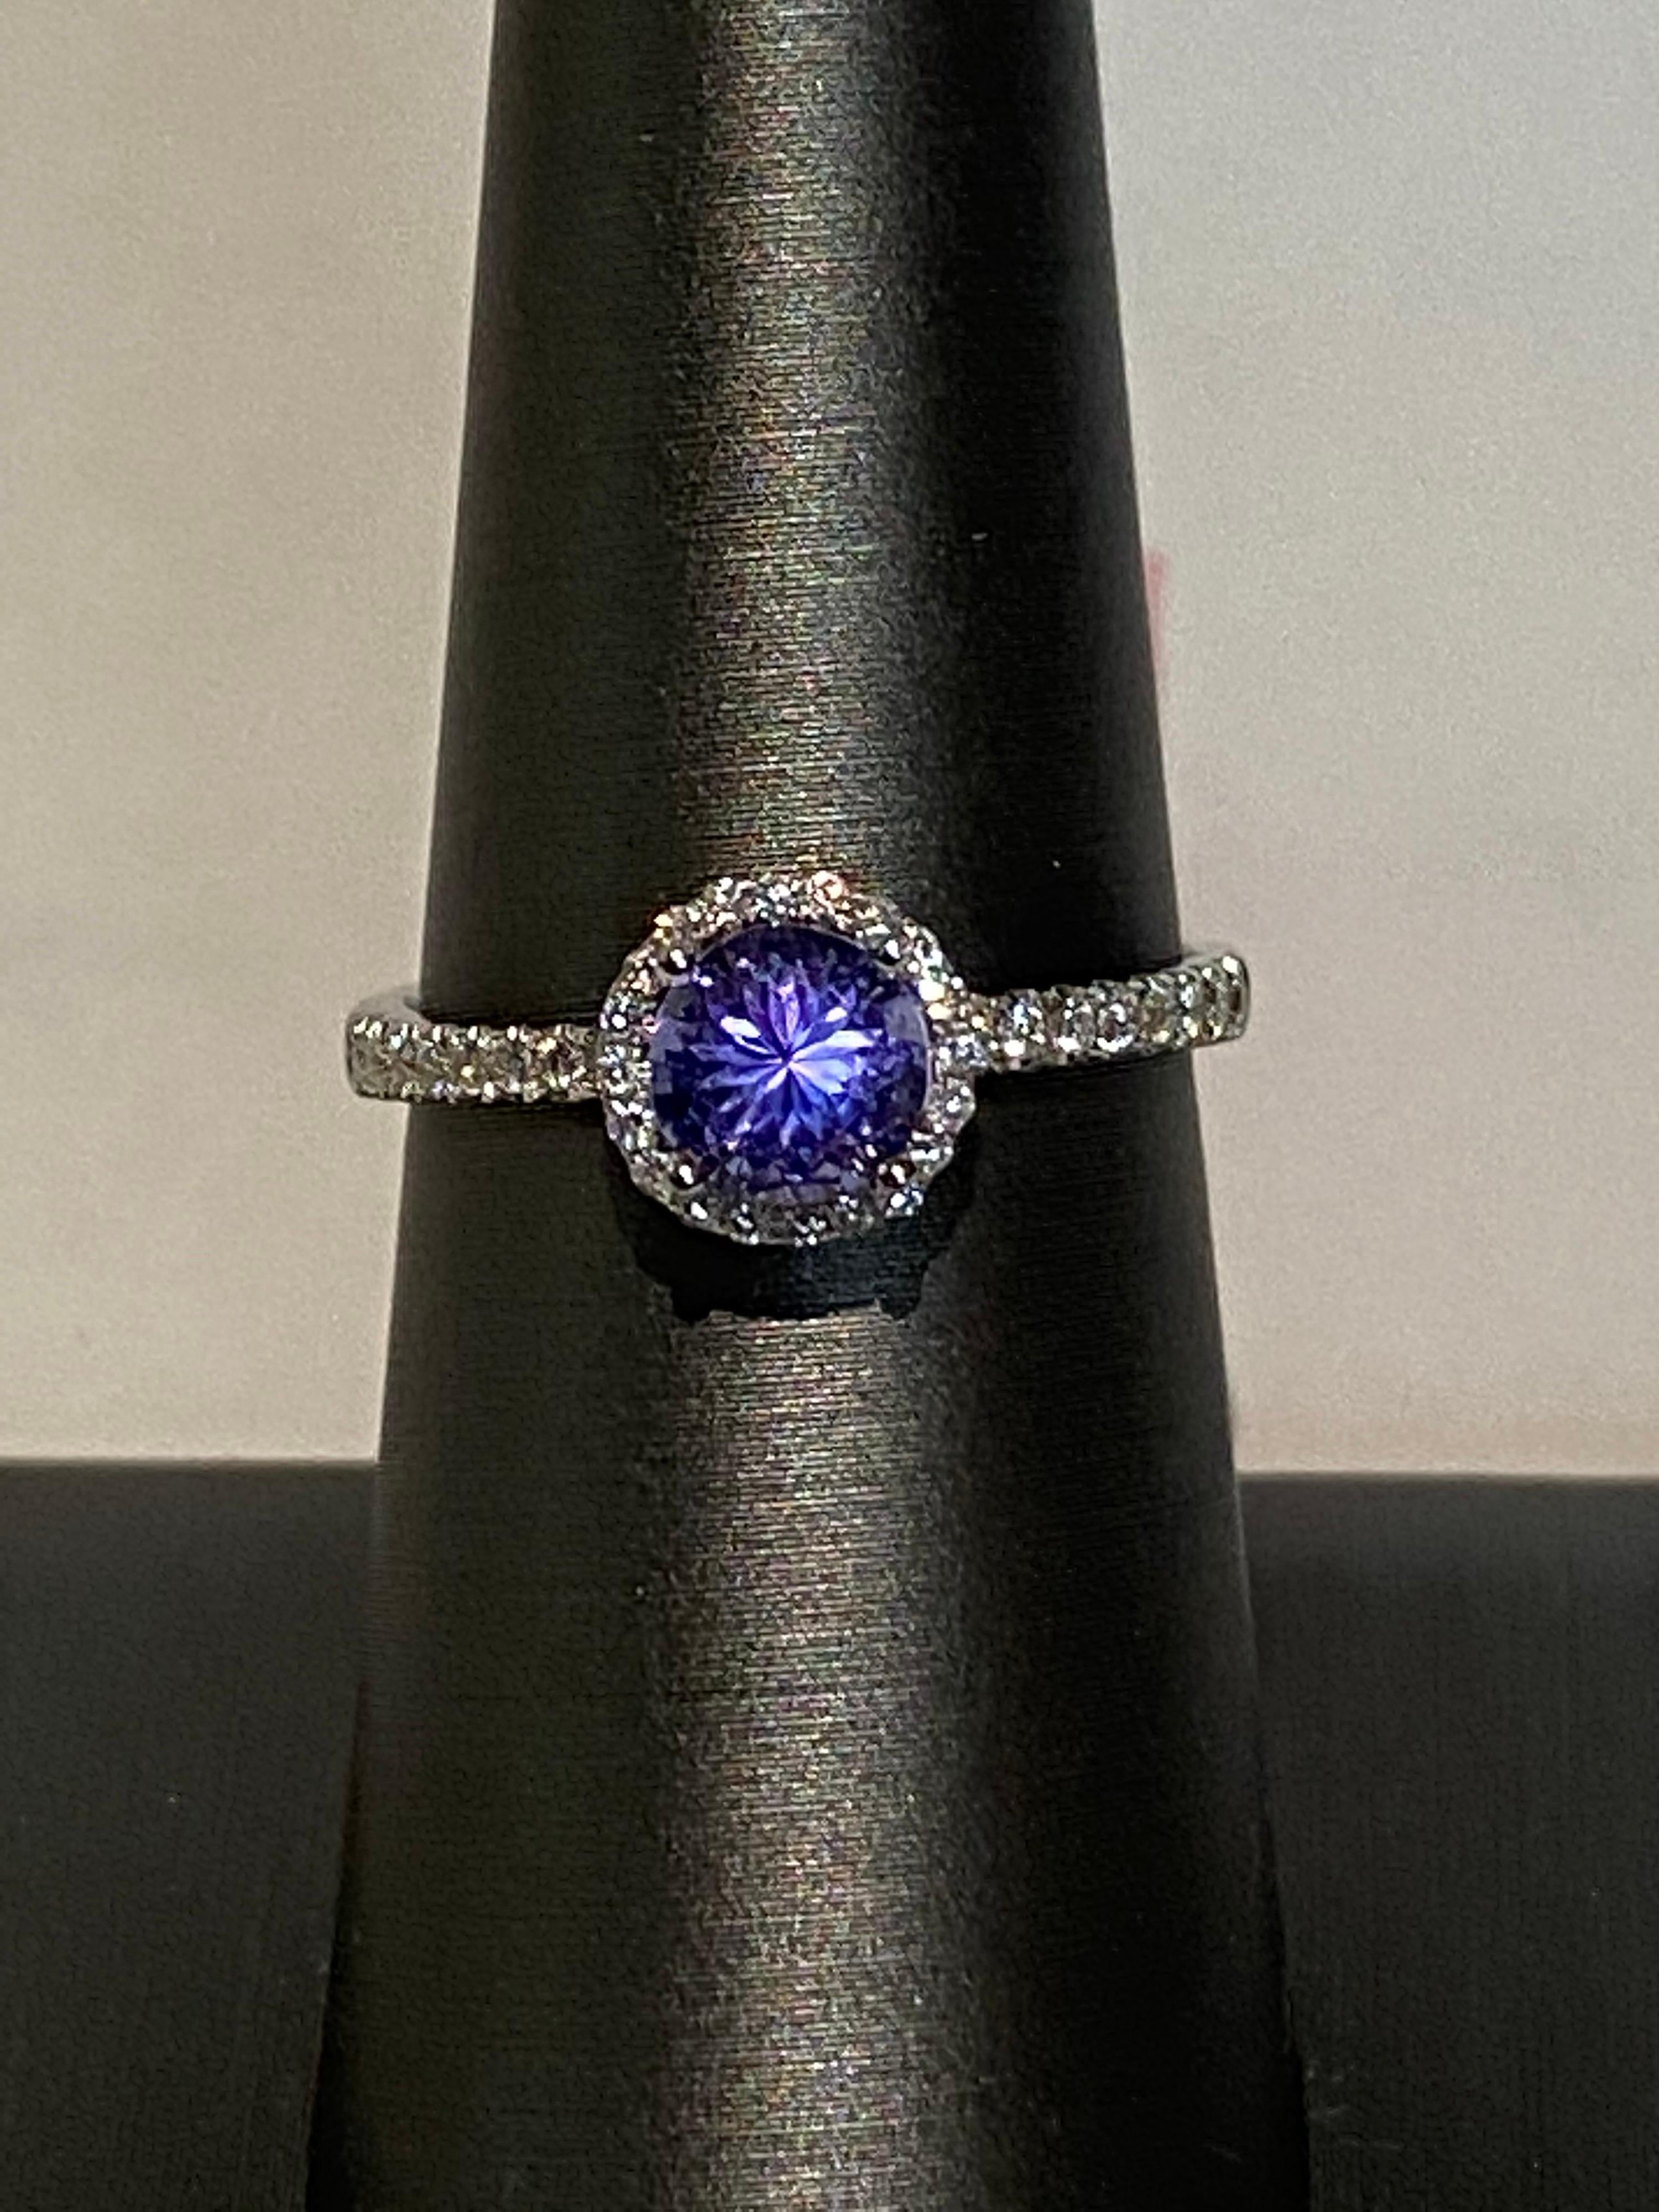 Halo and pave settings of white diamonds on a thin band enhances the round tanzanite and makes it a very simple and chic ring. Crafted with hand in white gold.
Tanzanite: 0.85ct
White Diamond: 0.20ct
White Gold: 14K
Size: 7 (resizeable)